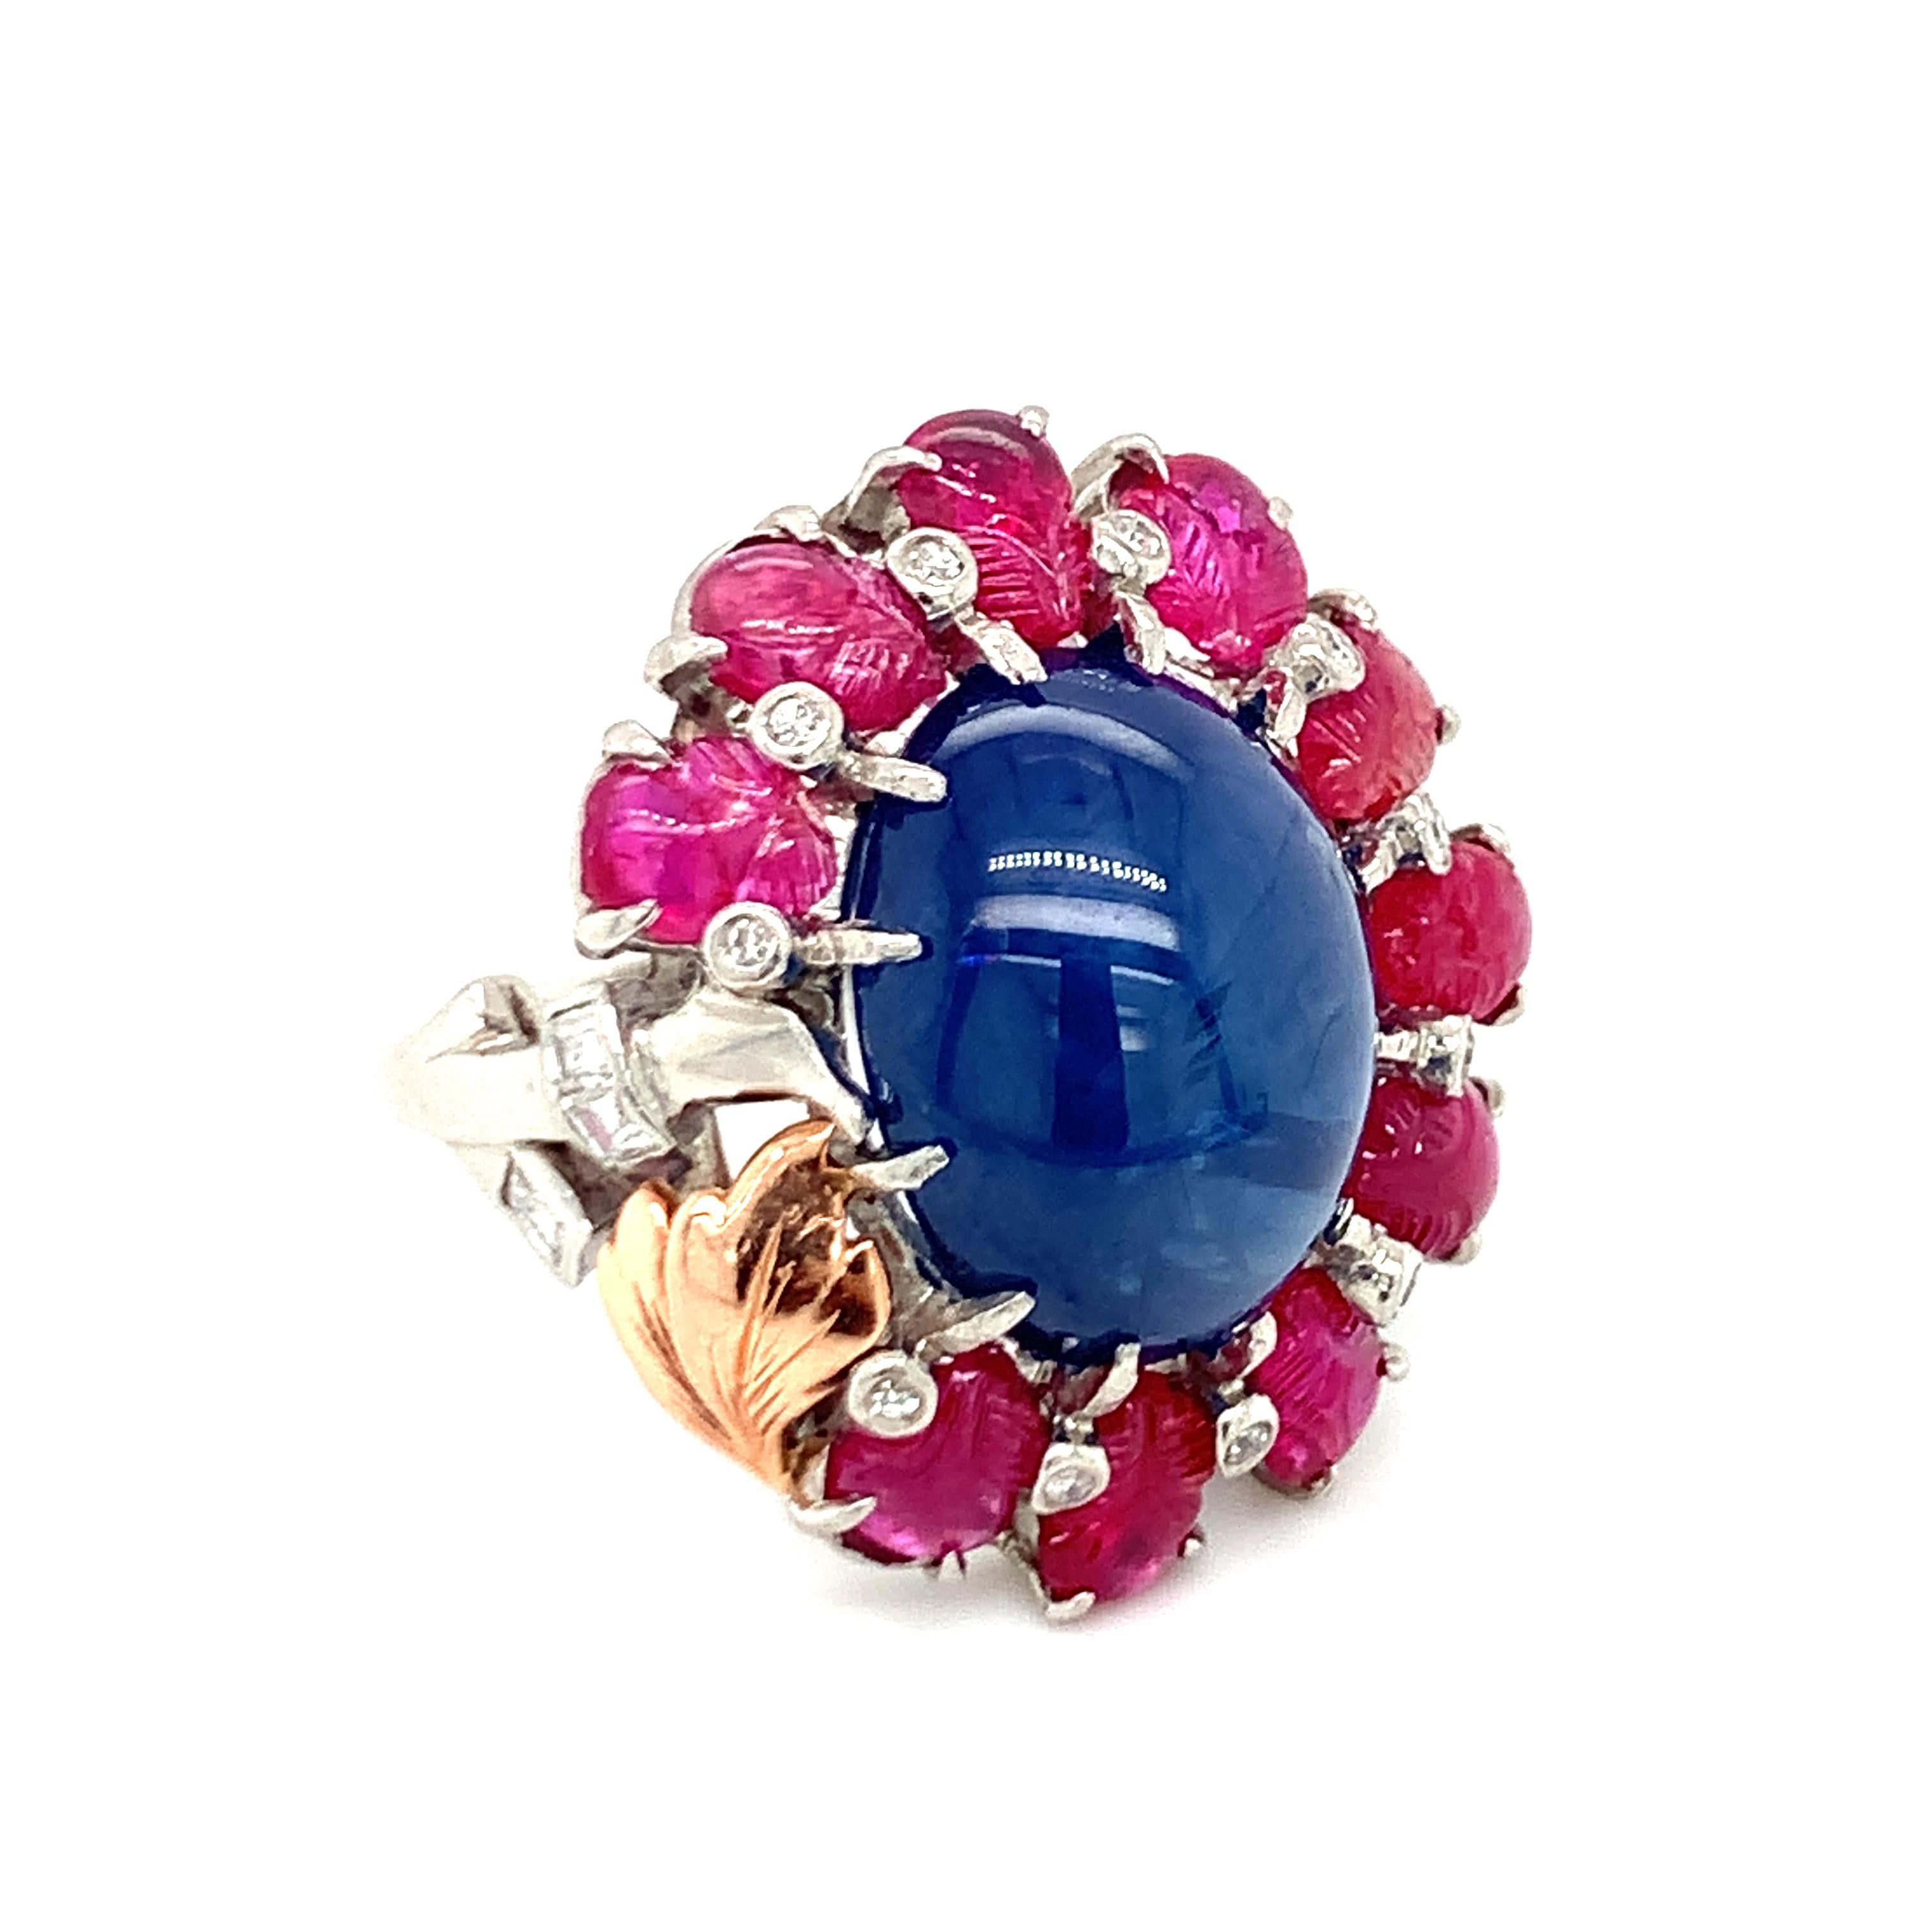 One mid-century sapphire, ruby and diamond platinum ring centering one oval cabochon sapphire weighing 18 ct. surrounded by ten carved cabochon rubies weighting 5 ct. Accented by a single rose gold leaf and 14 single round and square cut diamonds